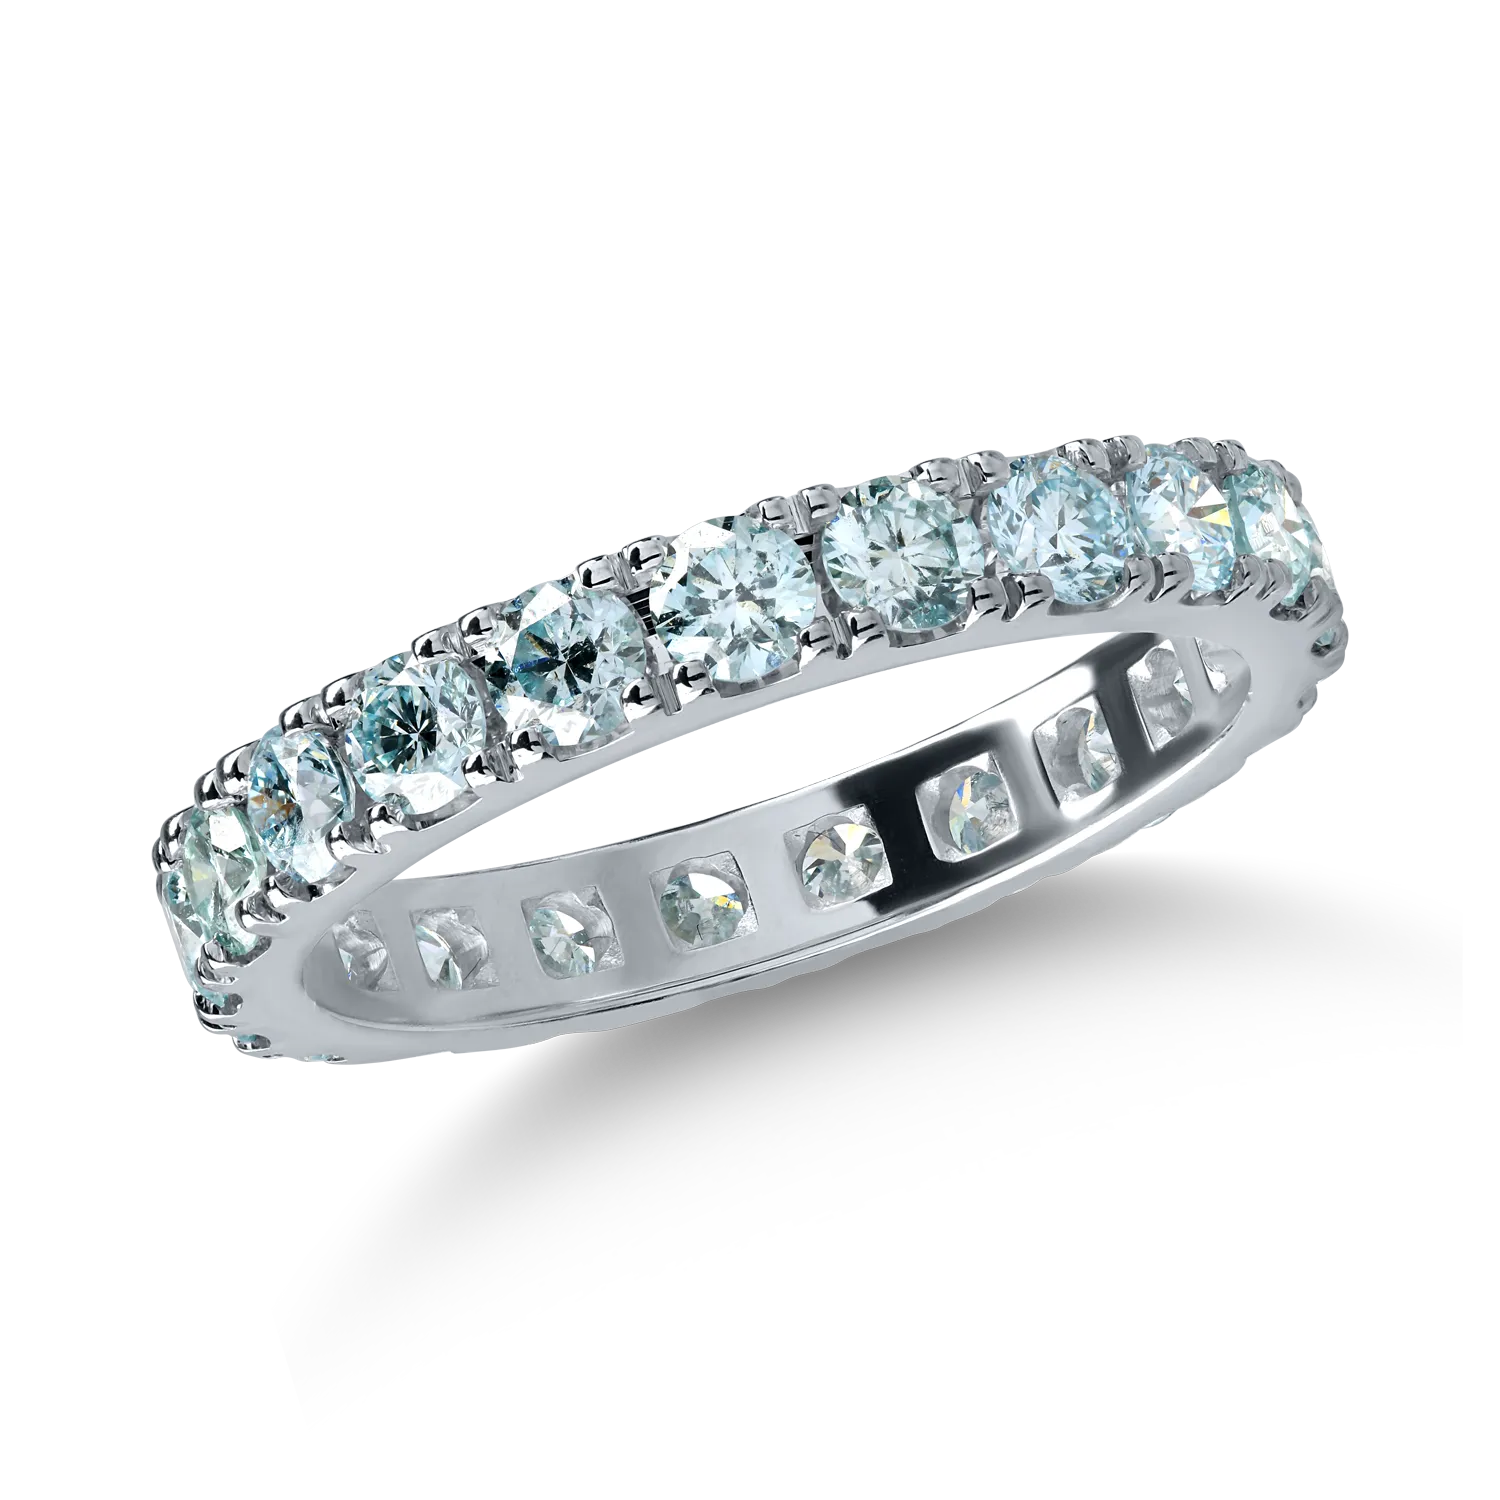 Eternity ring in white gold with 1.75ct ice-blue diamonds